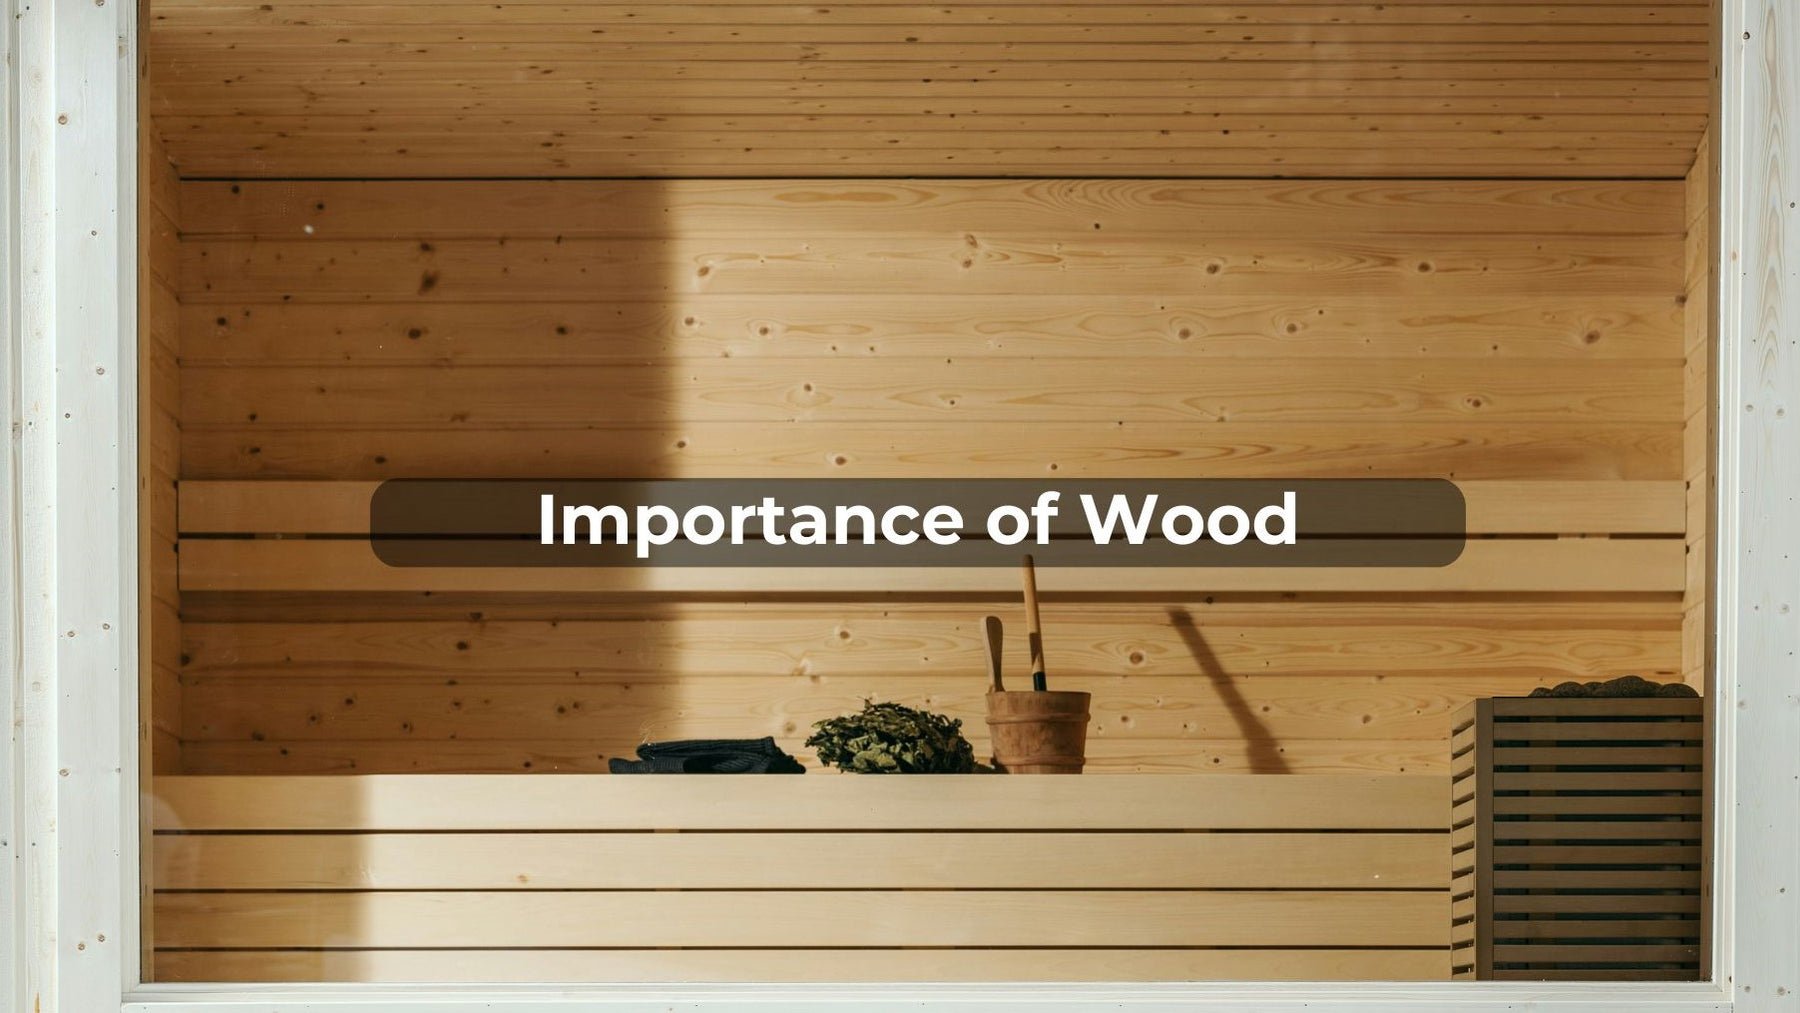 Importance of Wood